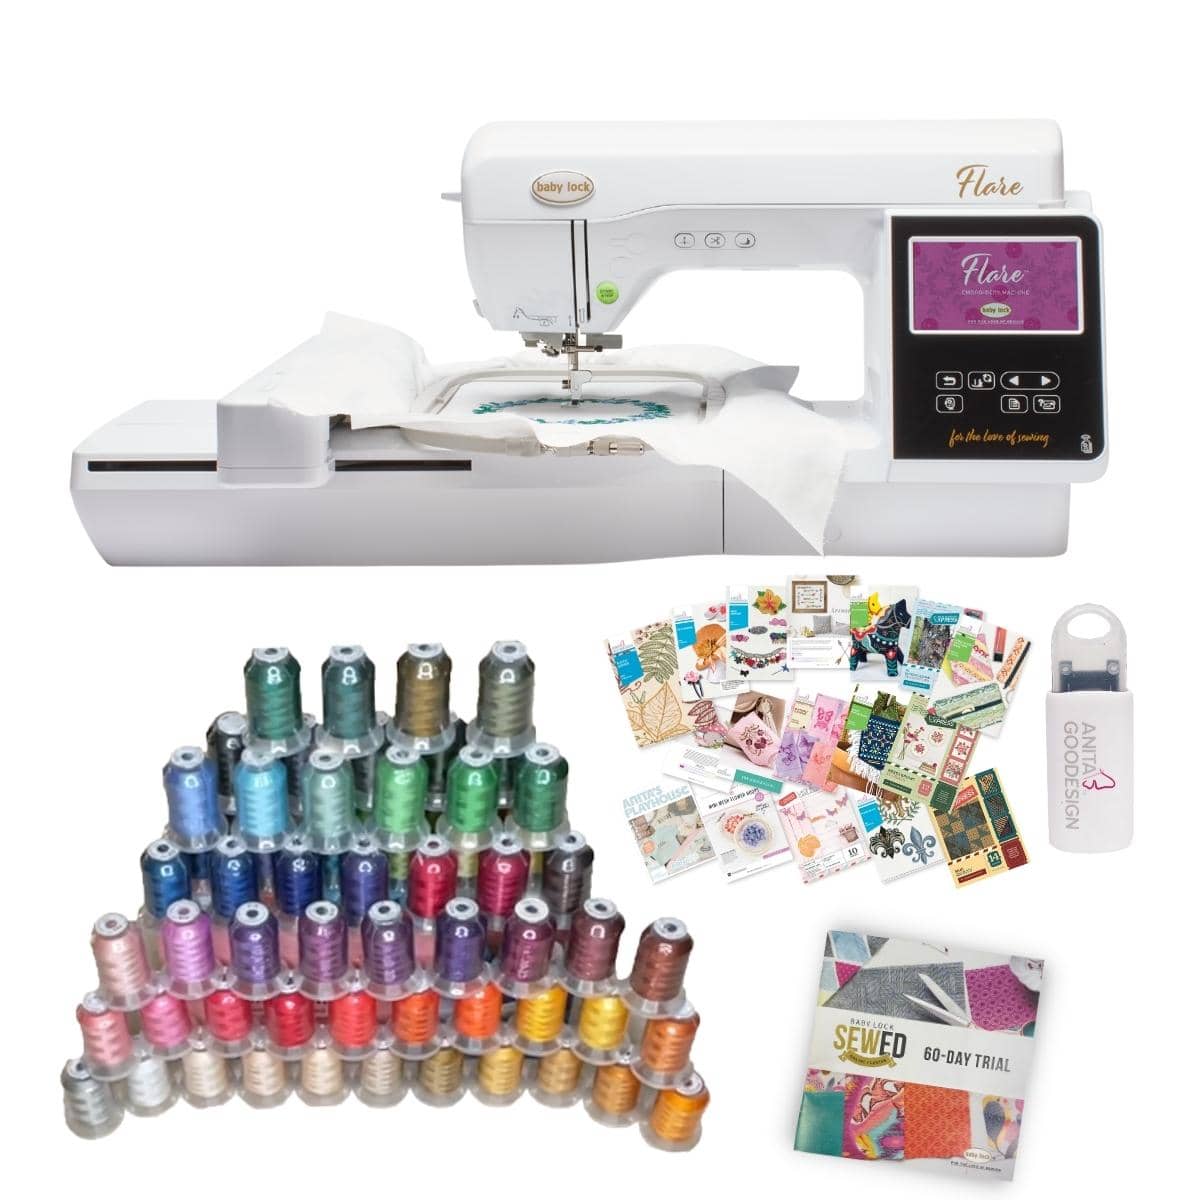 Why I Upgraded to a Baby Lock Sewing Machine - Sarah Hearts